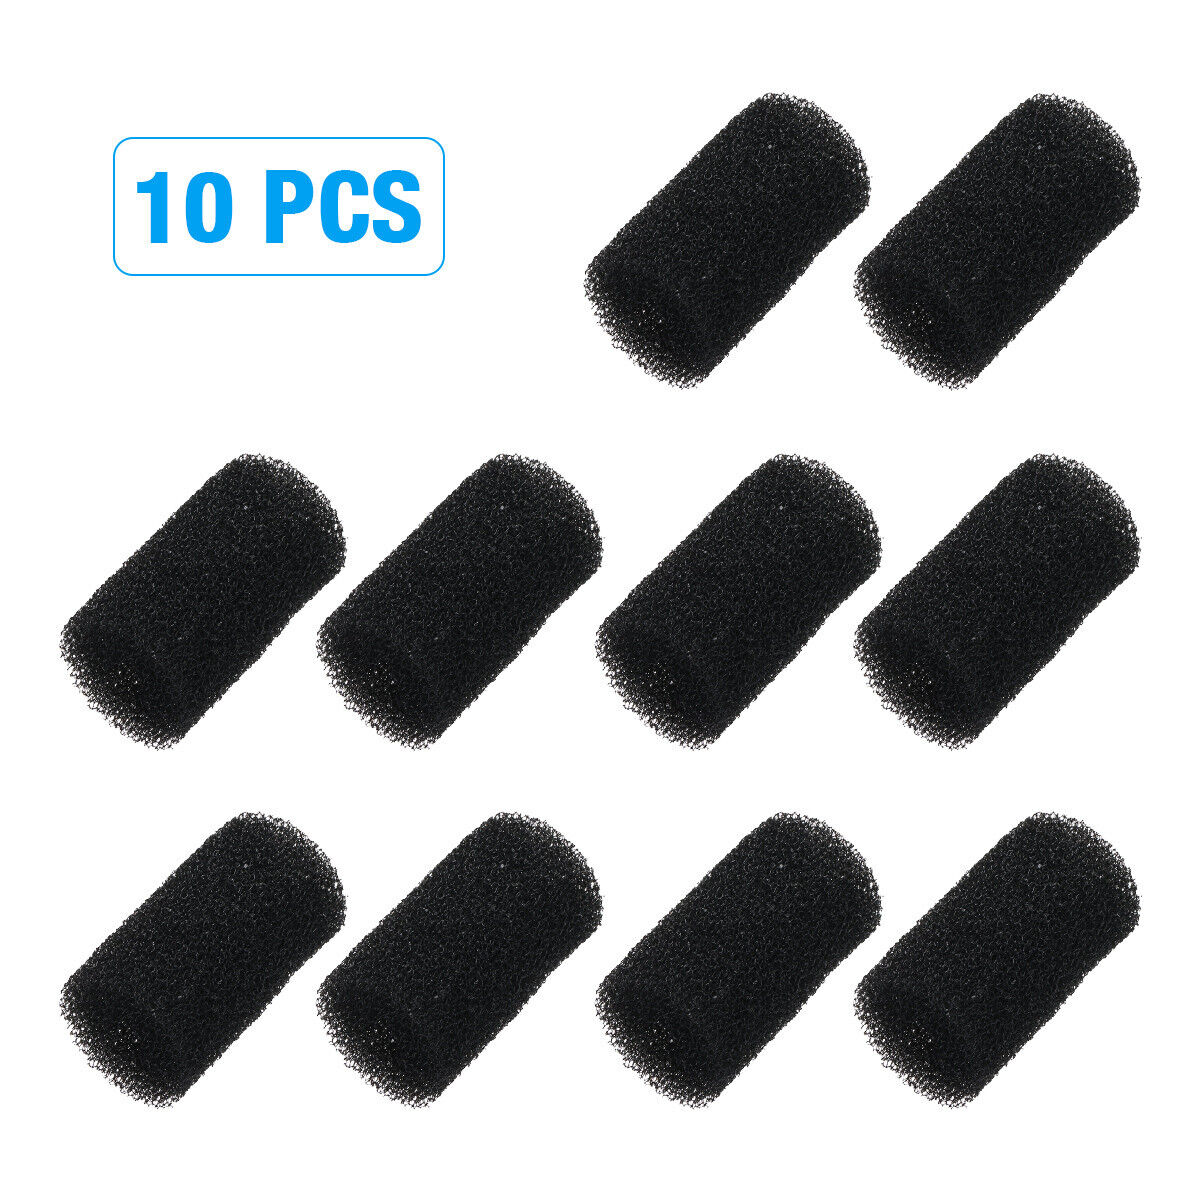 10PCS Pool Cleaner Sweep Tail Hose Scrubber for Polaris 180 280 360 380 91003105 Unbranded - фотография #2